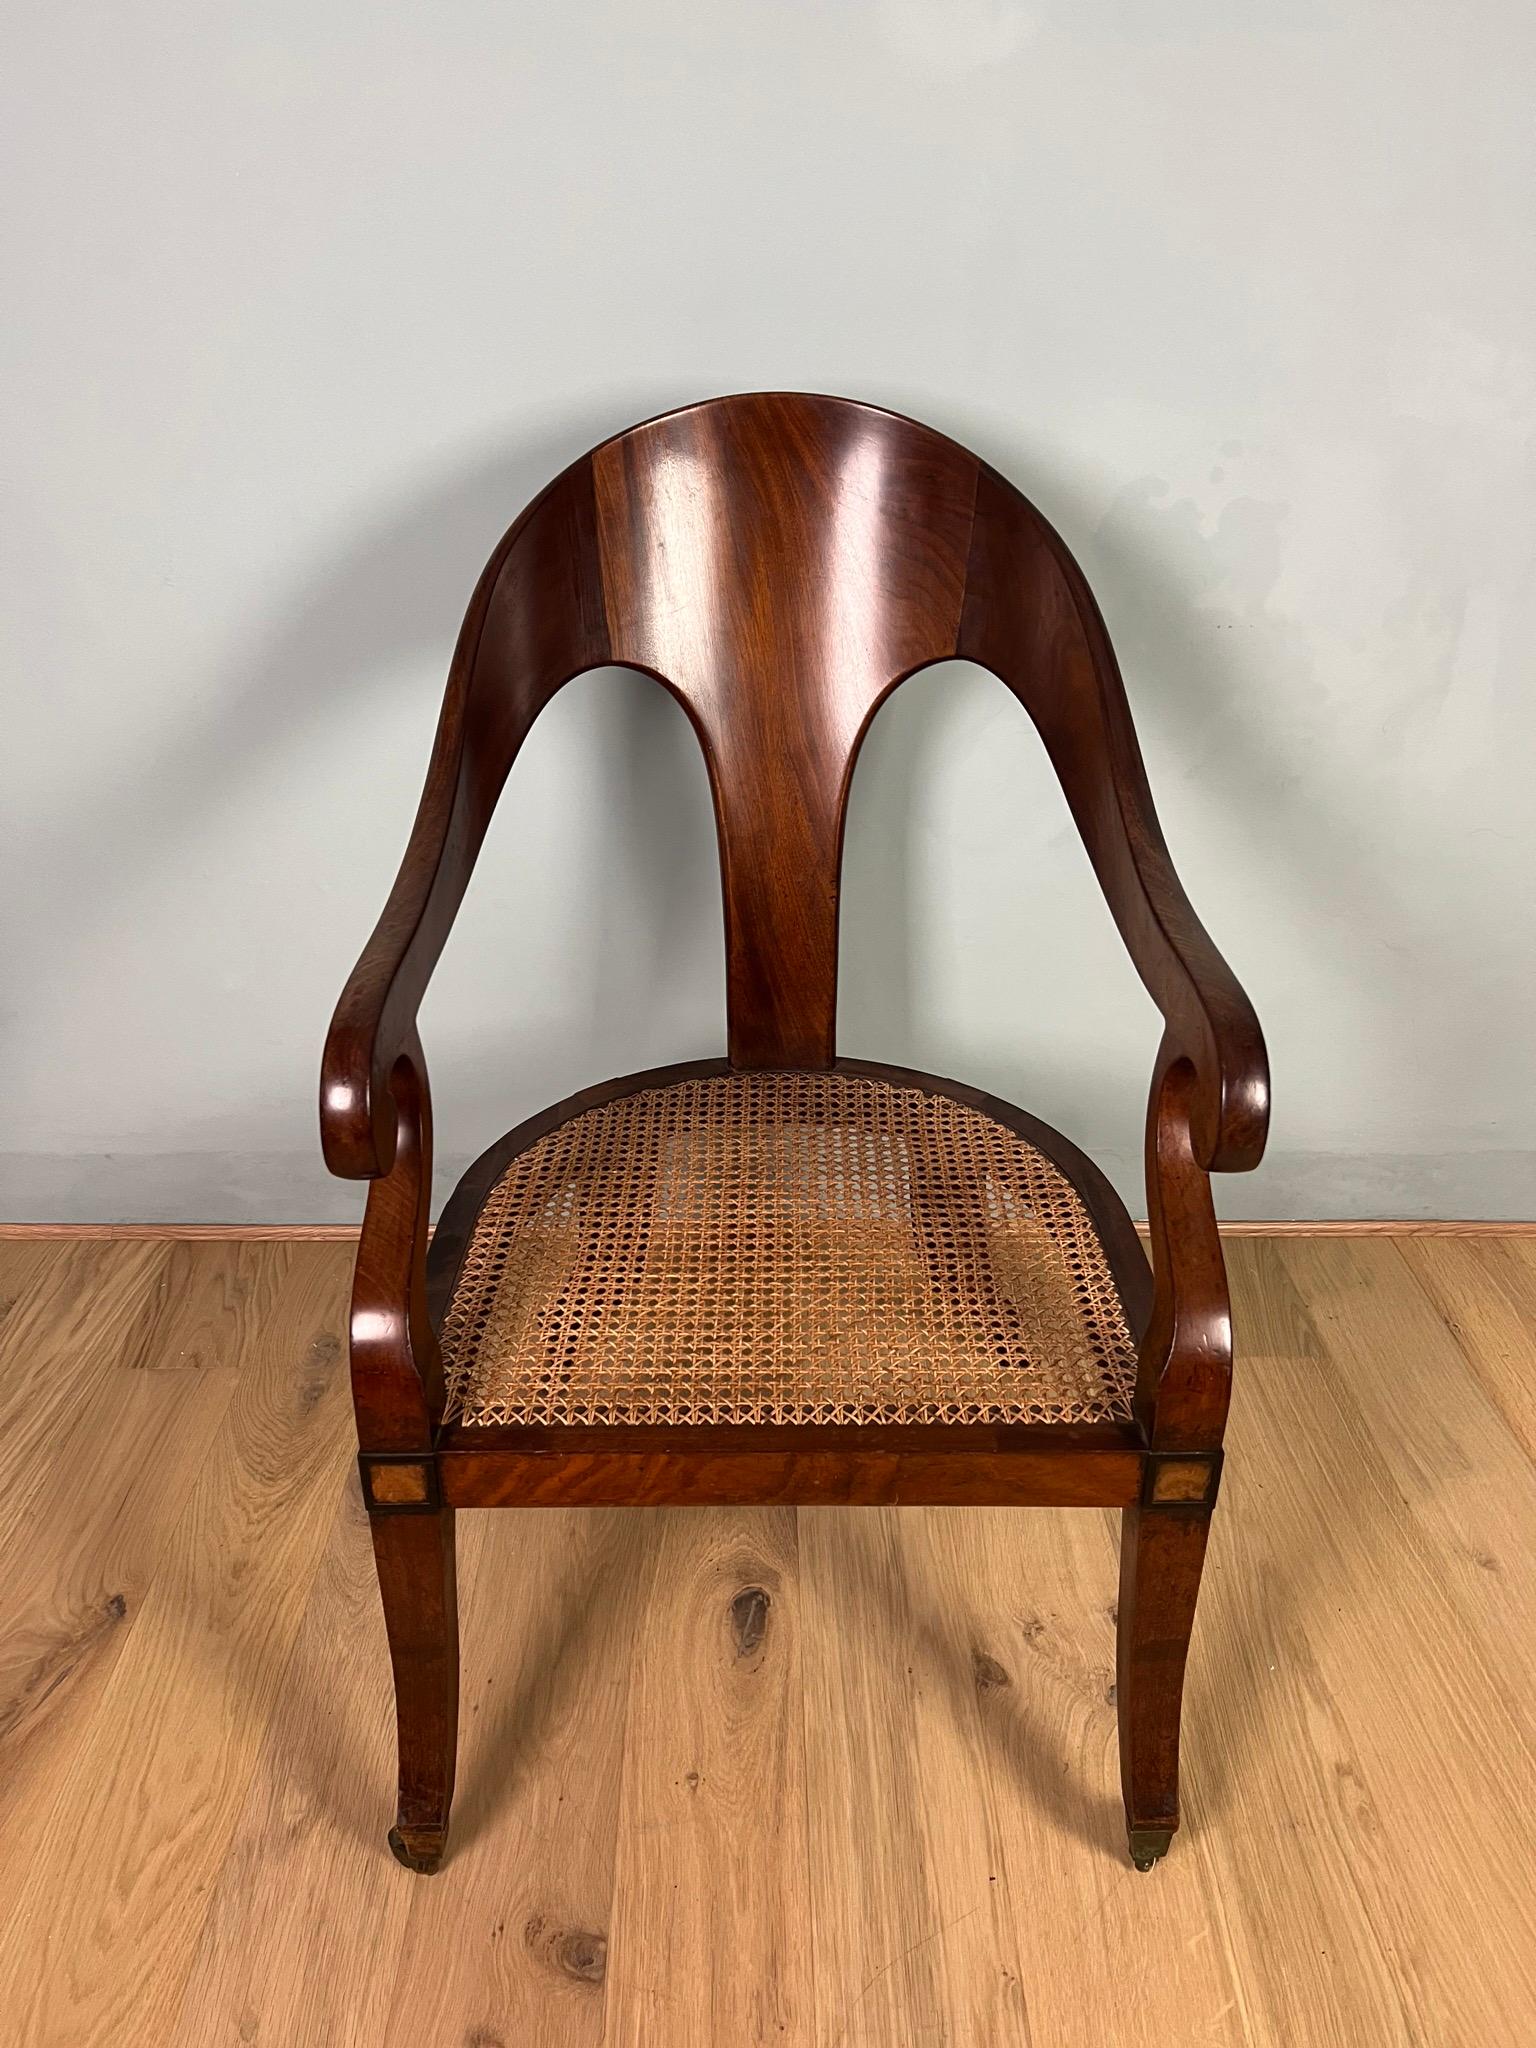 This Regency mahogany Roman spoon back Bergere armchair has a wonderful flowing shape to it’s cresting rail, classical sweeping arms and sabre front and back legs finishing on square tapered brass casters. The seat is traditionally caned and the